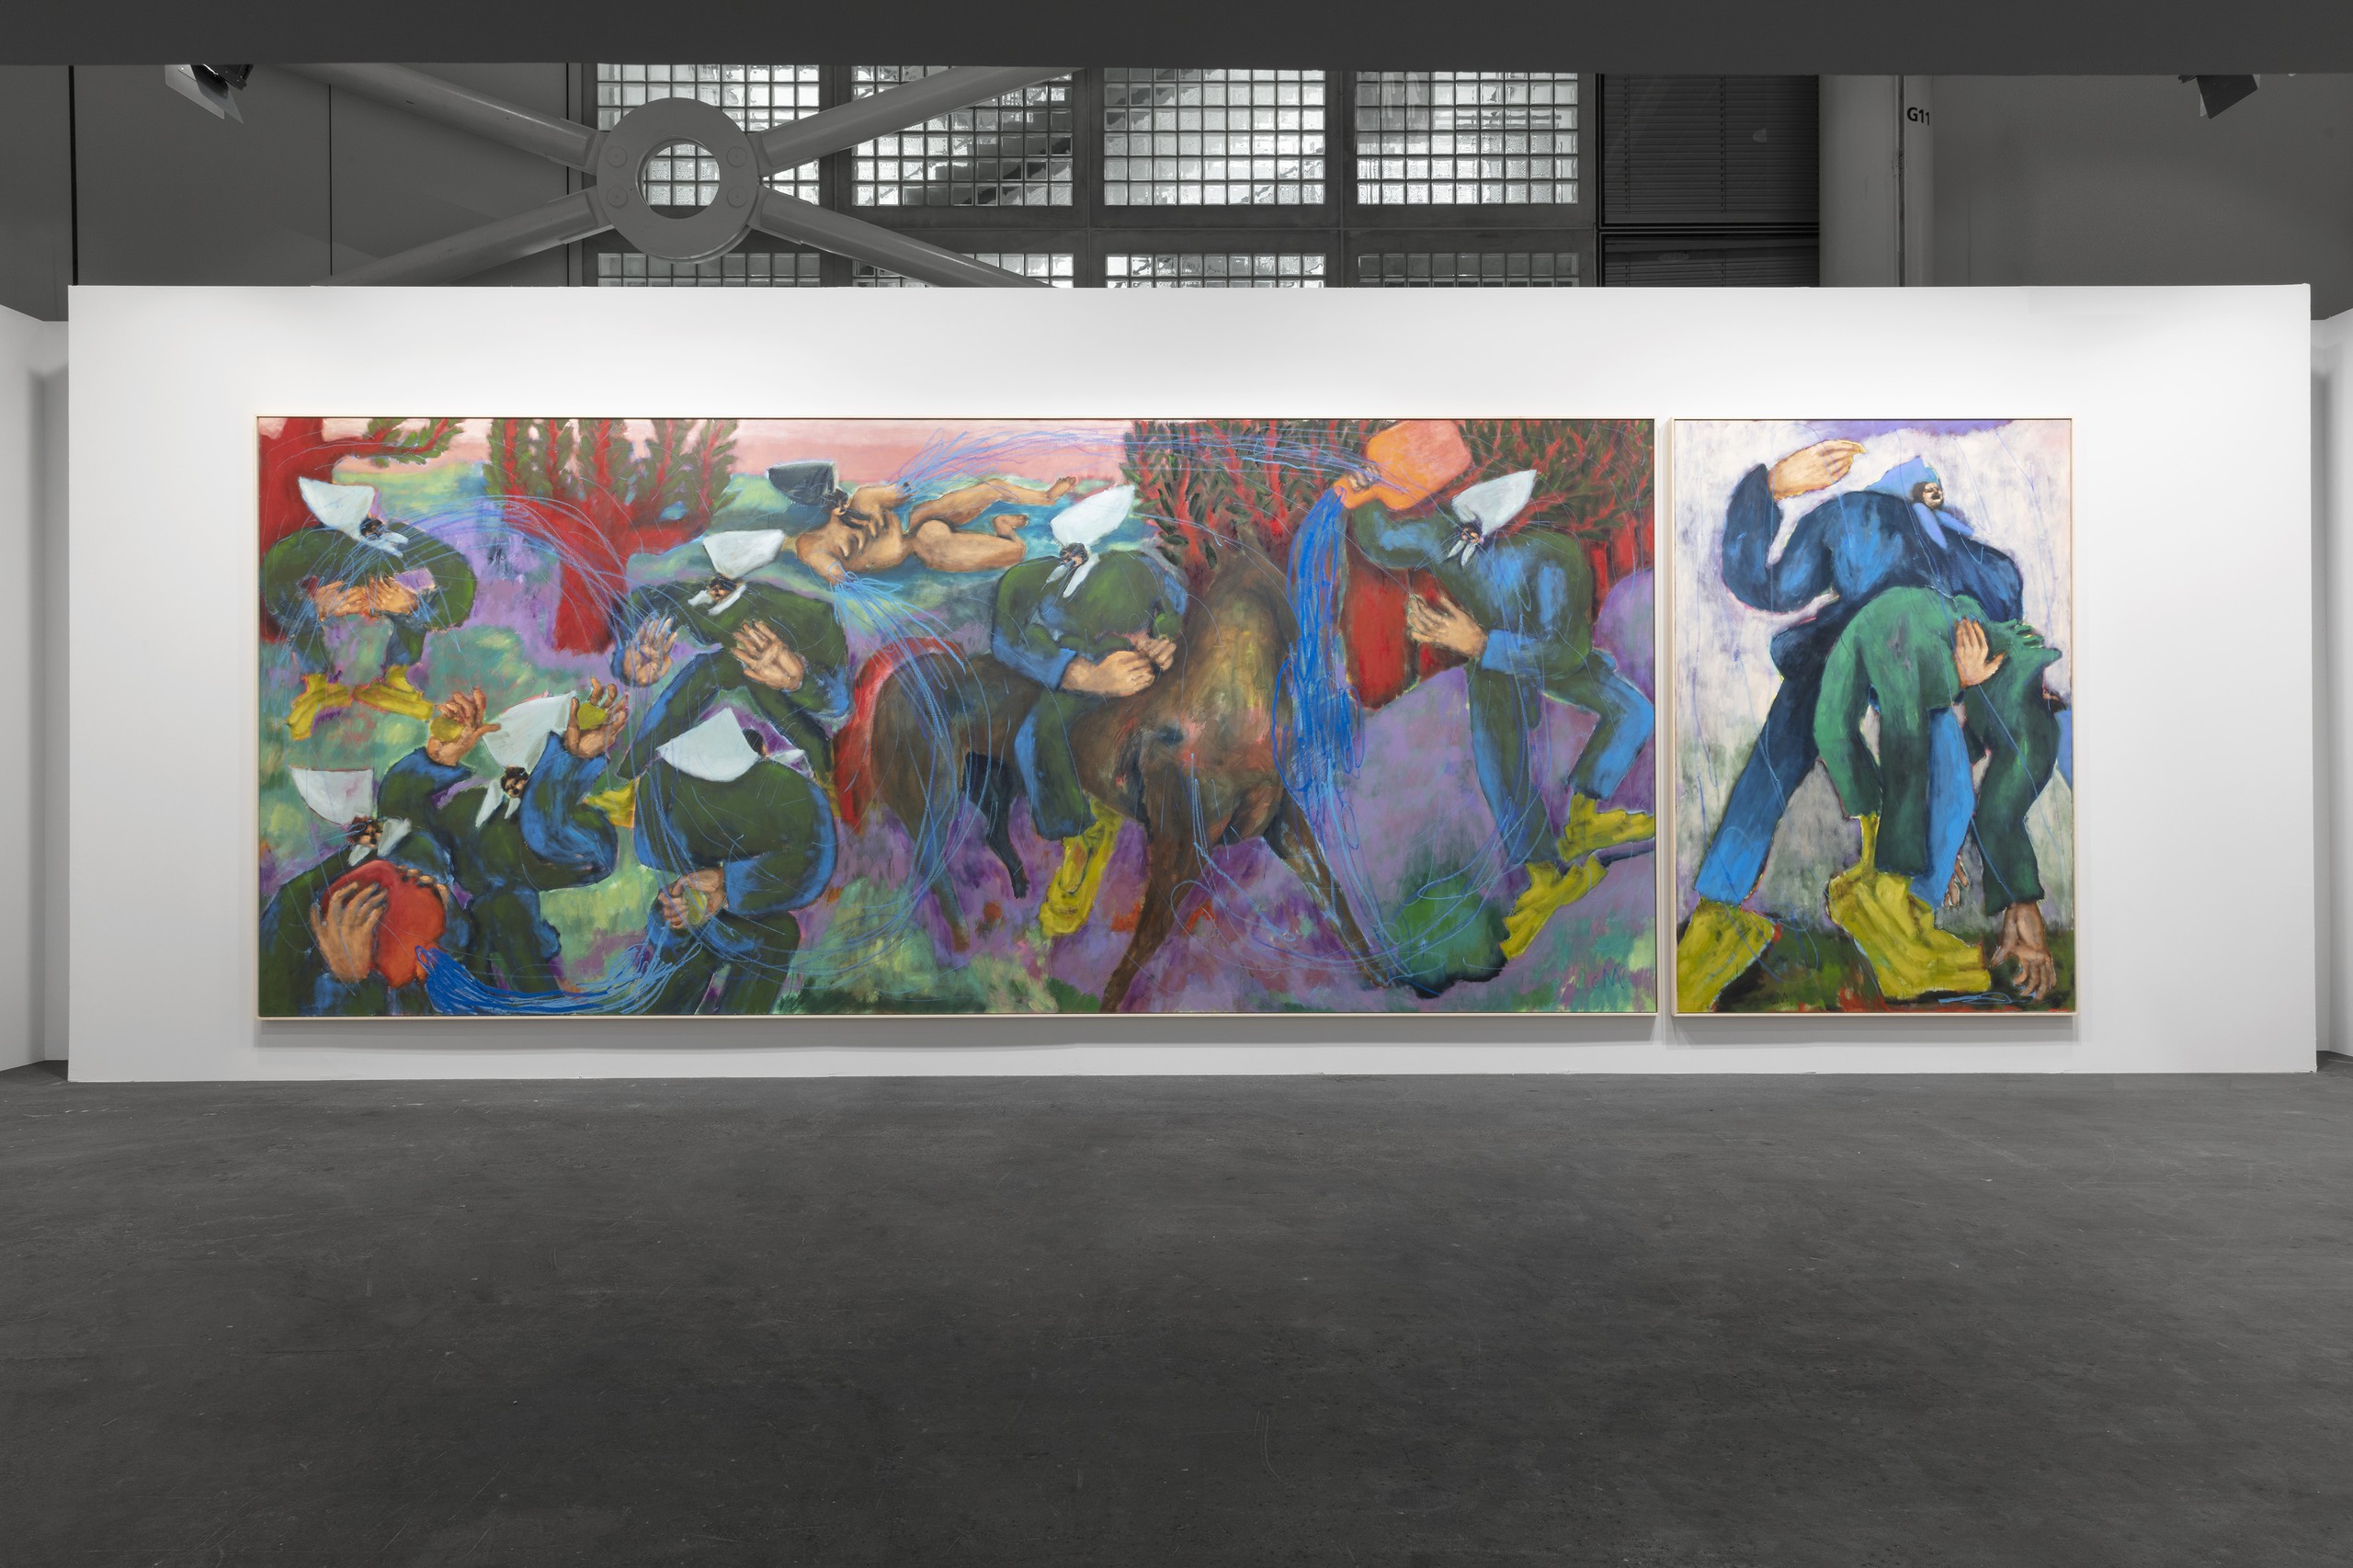 Installation view, Art Basel Unlimited 2023Conny MaierThe Source, 2023Oil, oil stick, pigments on canvasPanel 1: (300 x 700 cm // 118 x 275 1/2 in)Panel 2: (300 x 200 cm // 118 x 78 1/2 in)